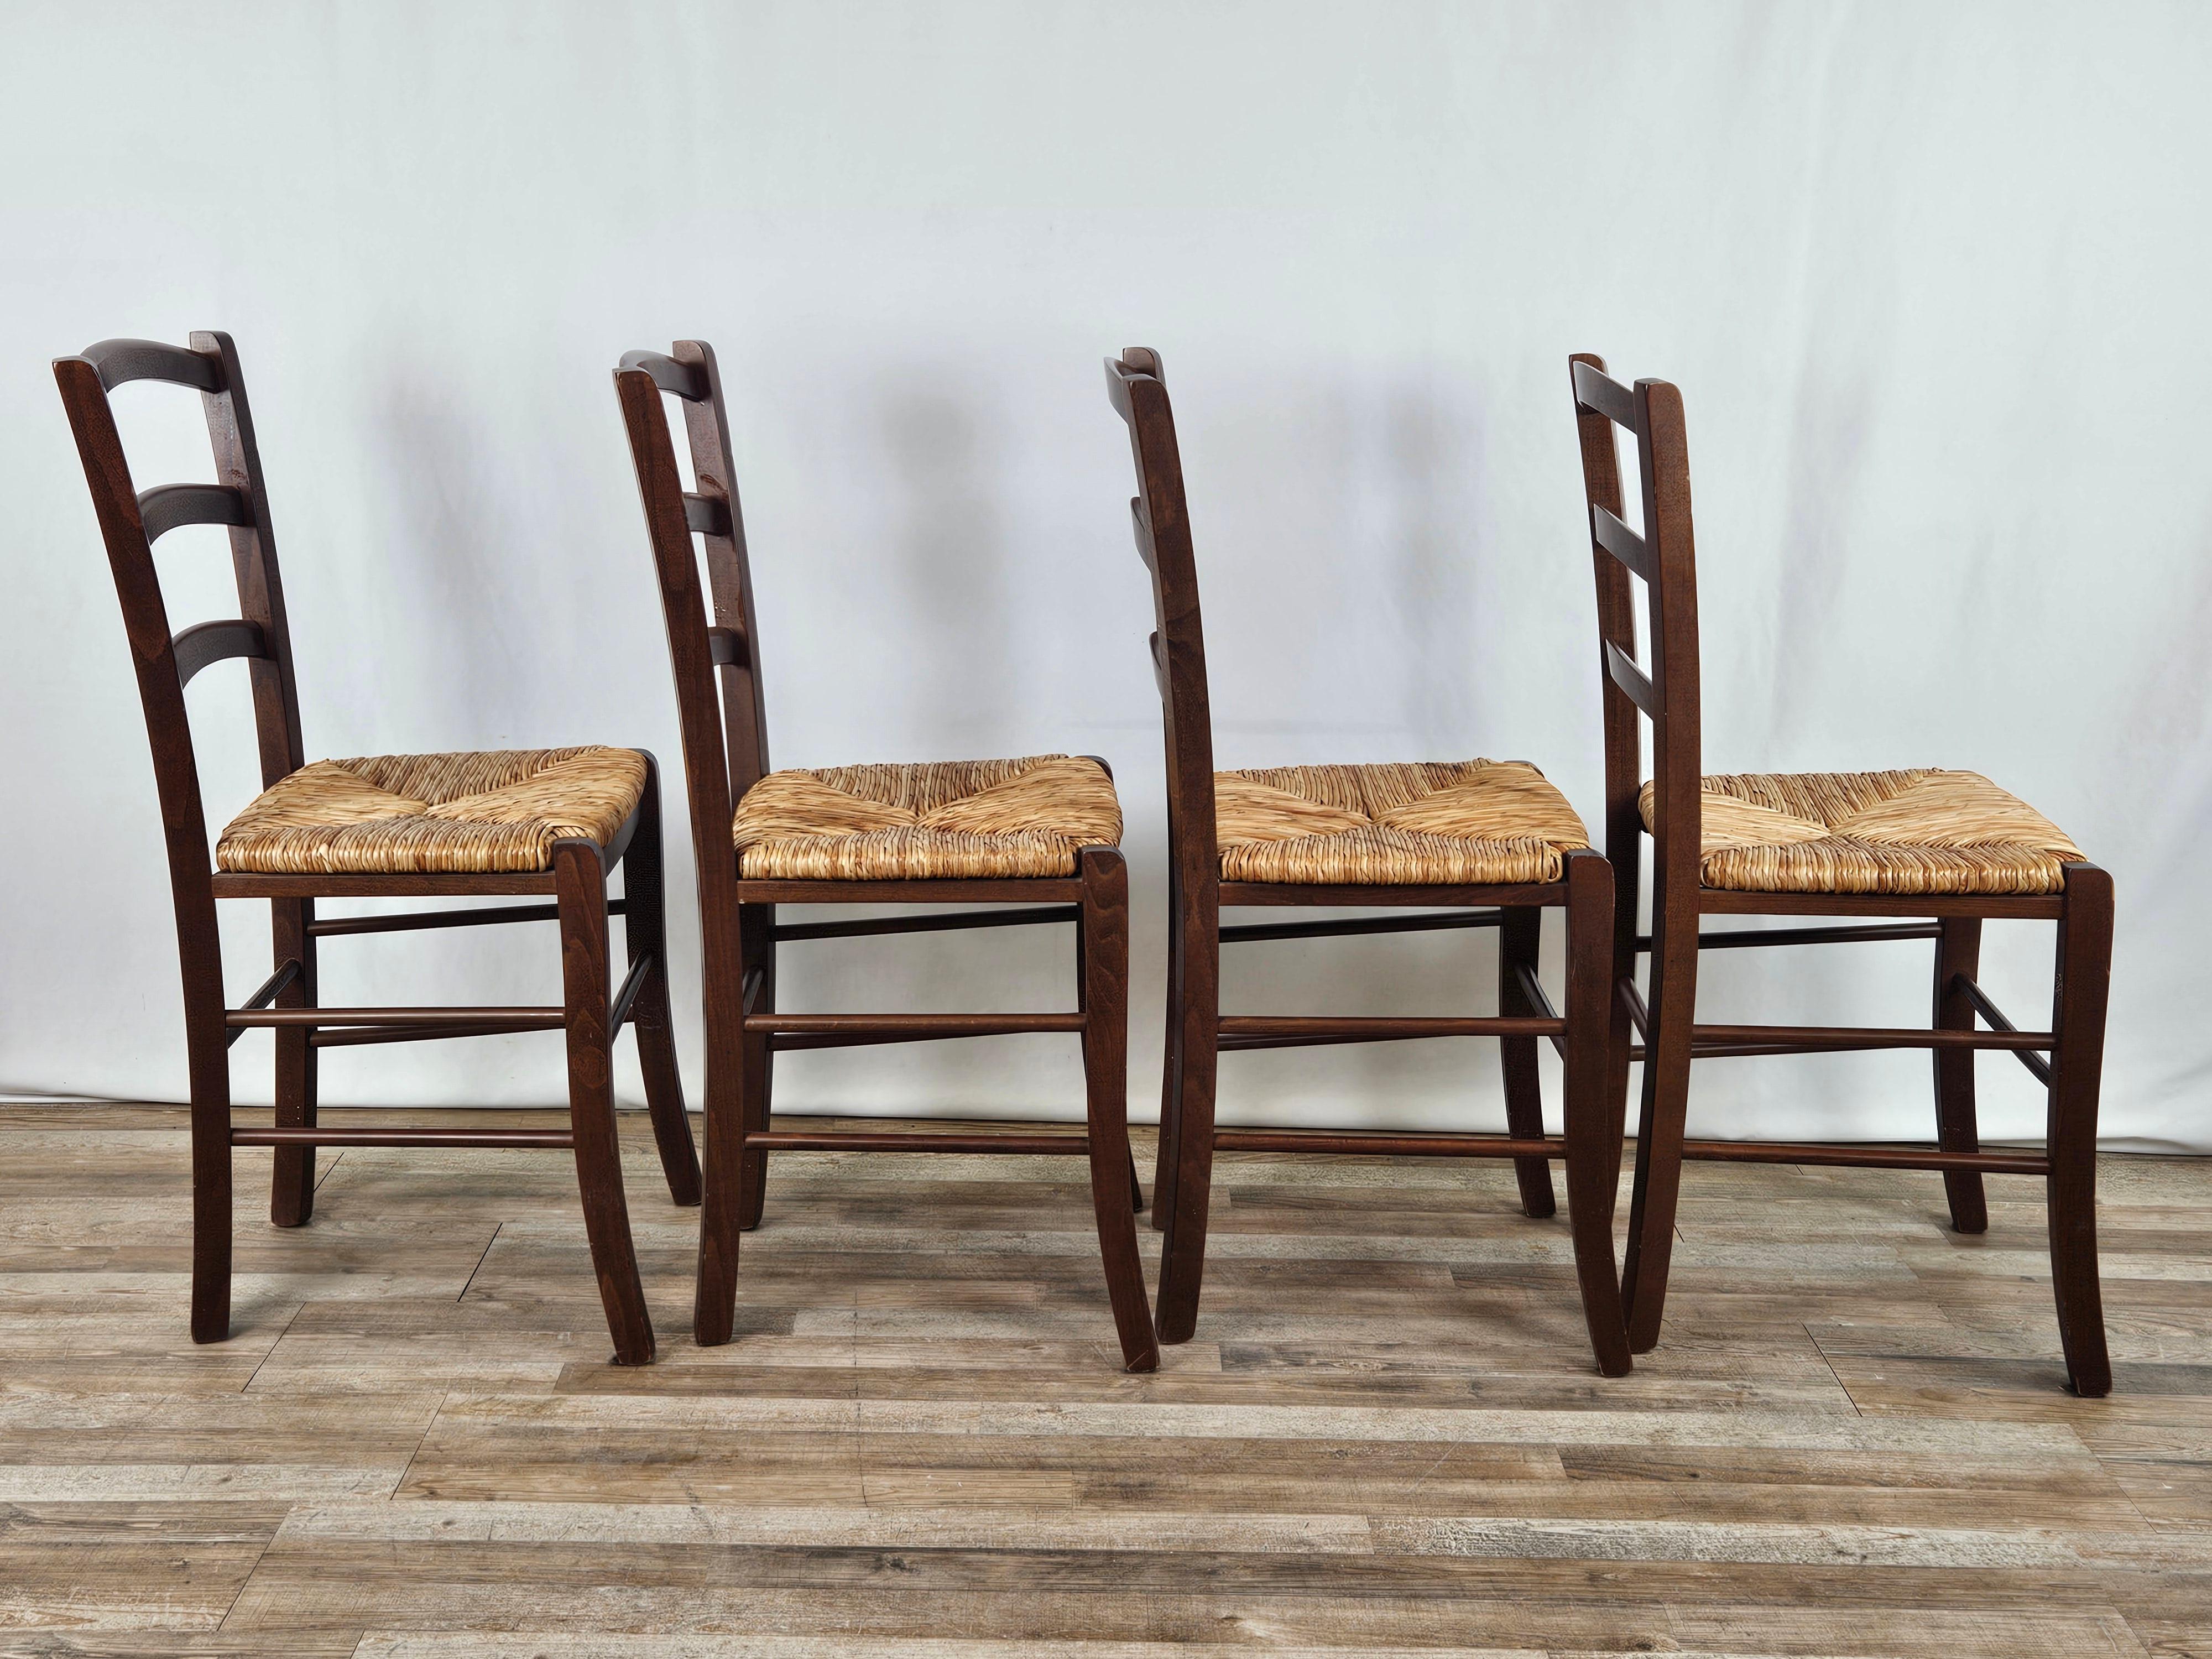 Rustic Set of four dining room chairs made of wood and straw For Sale